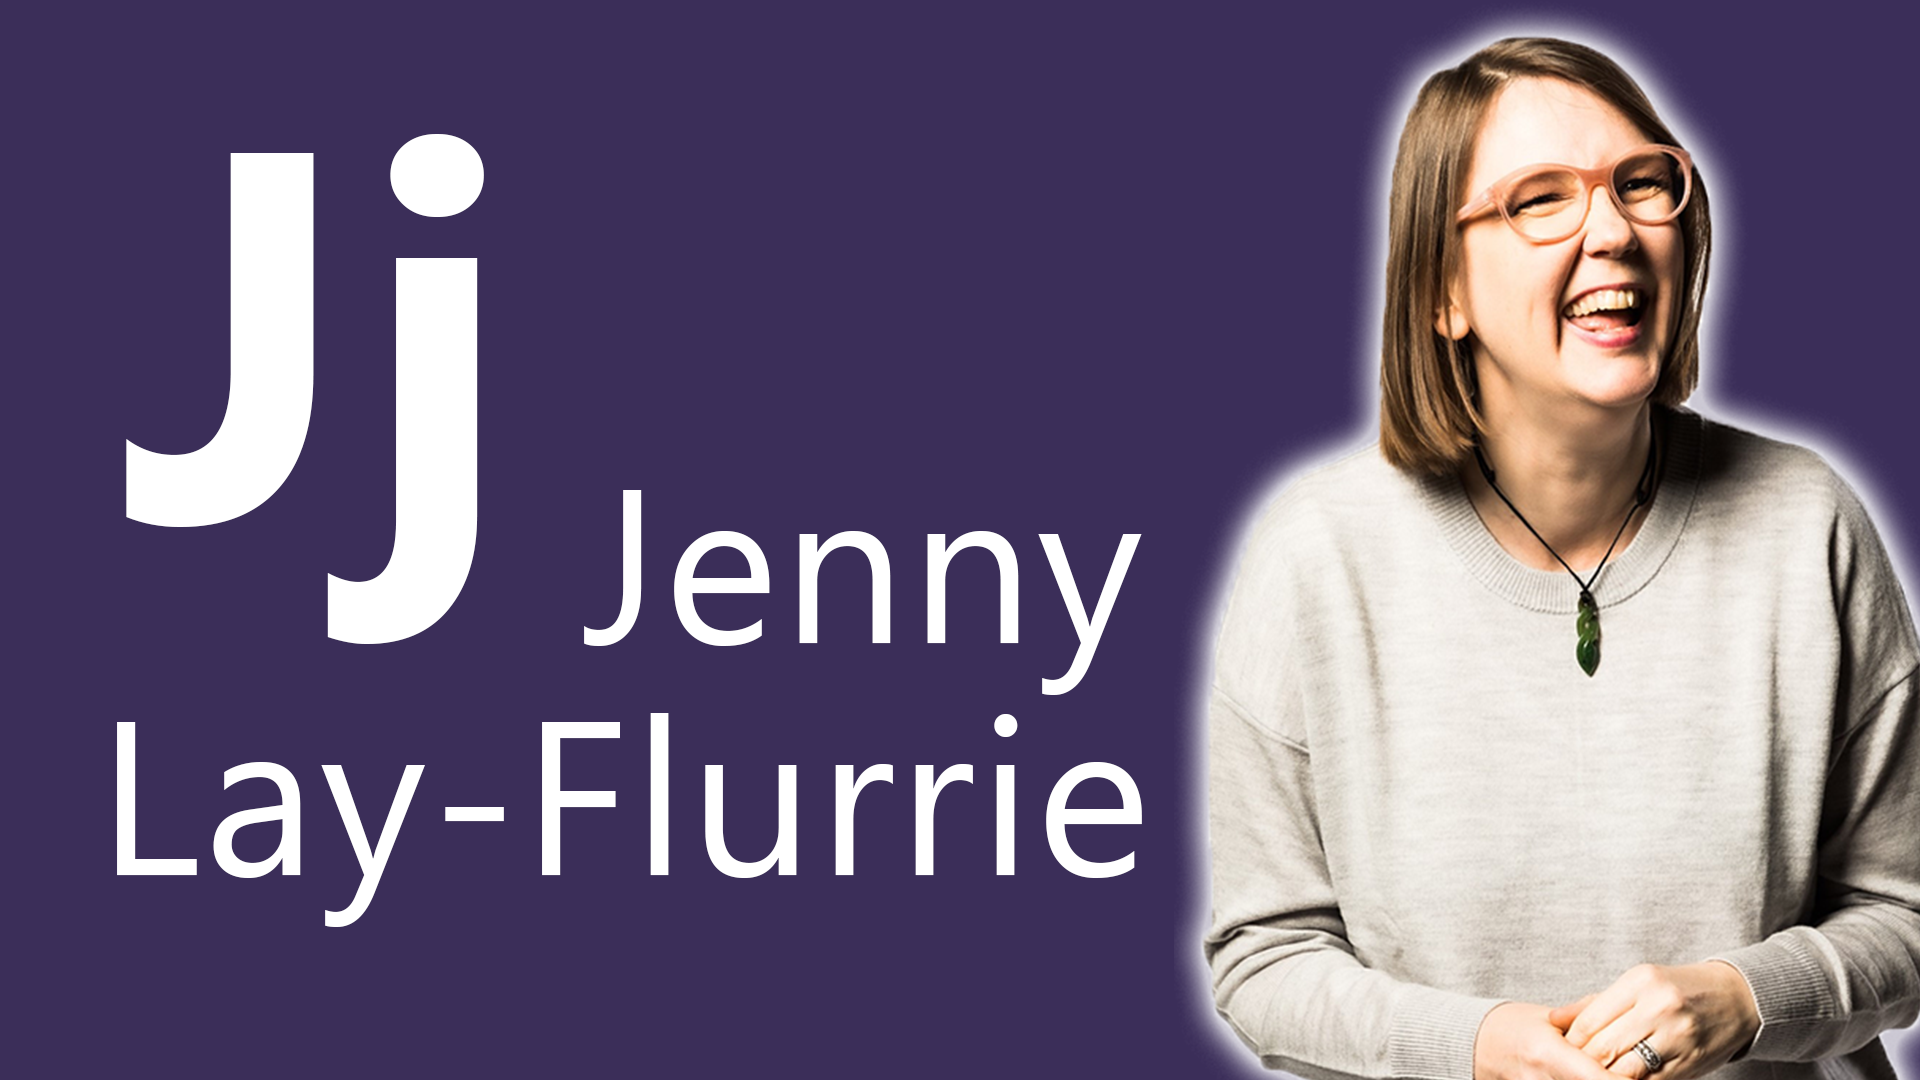 J is for Jenny Lay-Flurrie. Jenny smiles.